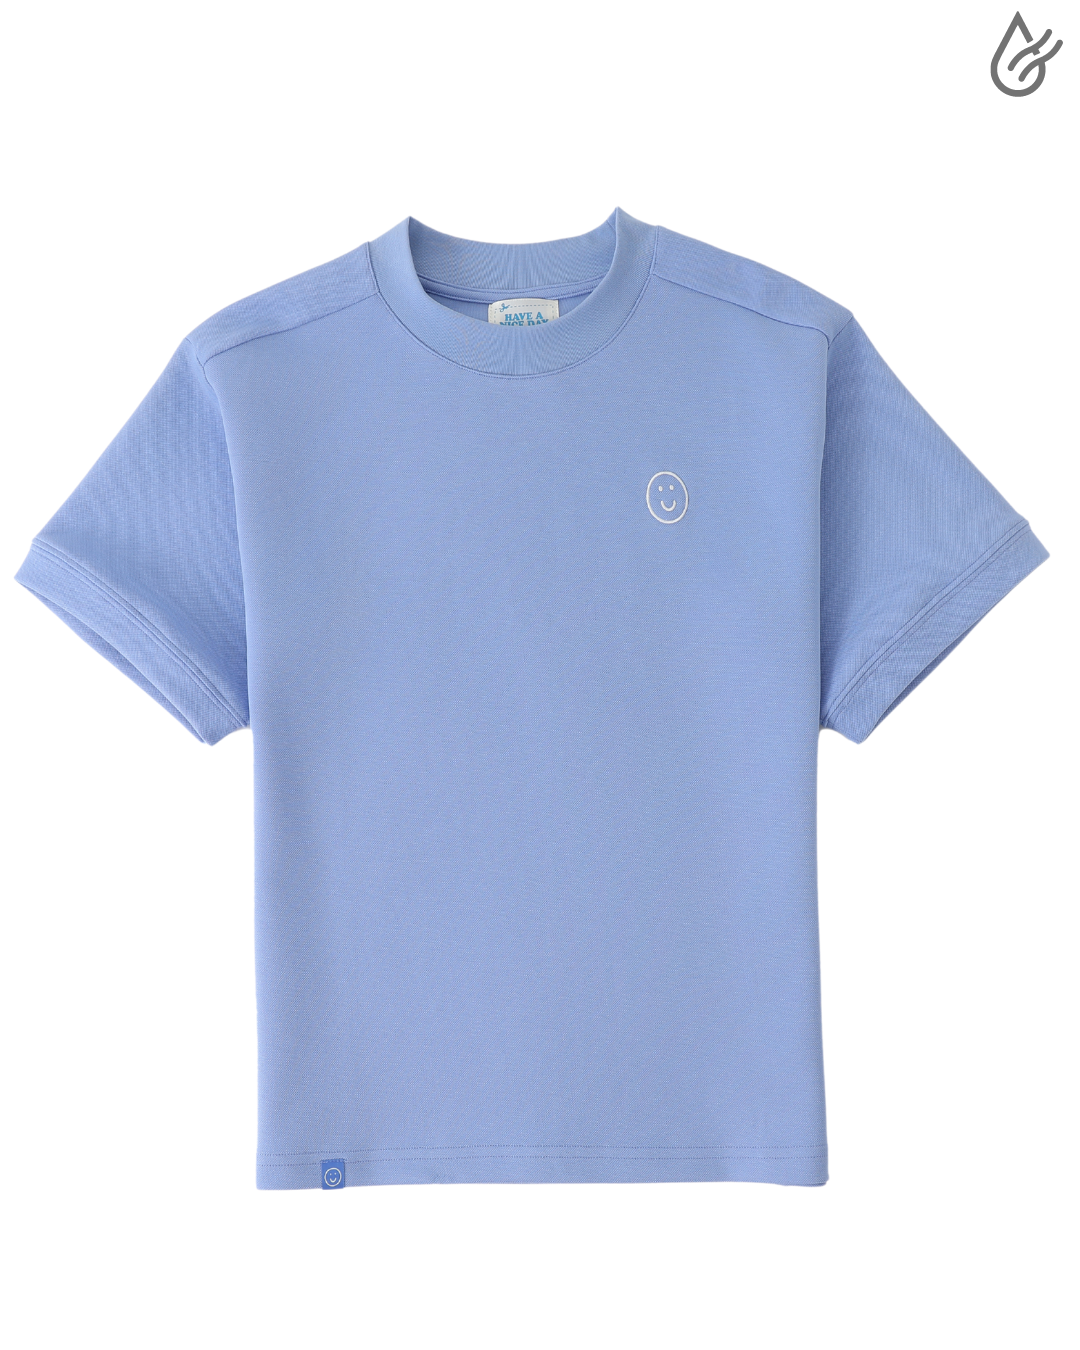 Signature Premium "Air-con" Tee in Frosted Blue